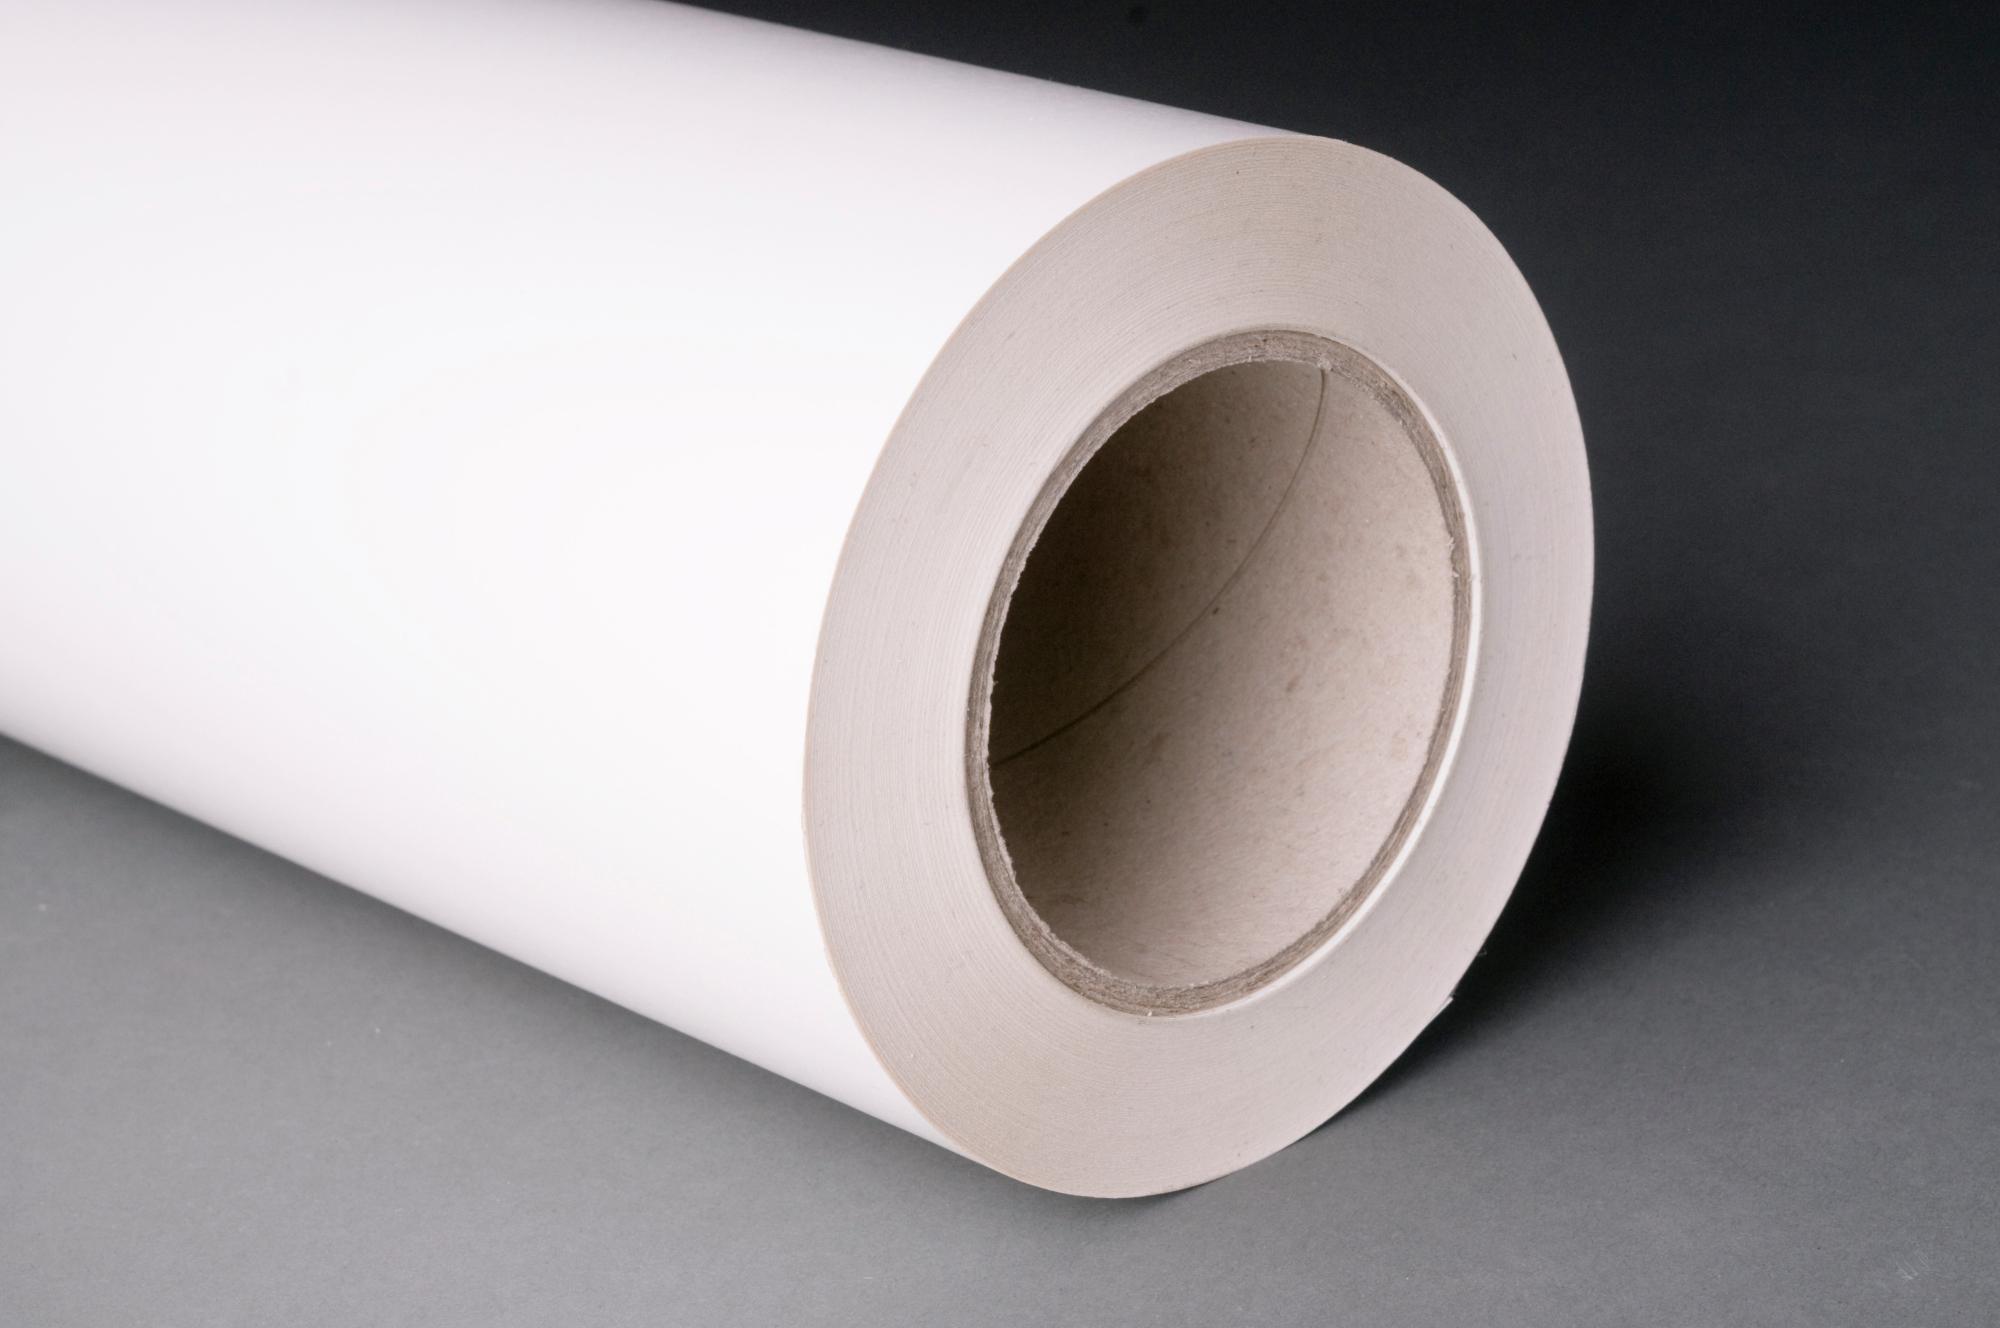 Cold Mounting Film for rough surfaces, Pressure Sensitive Film - size: 210mmx5m